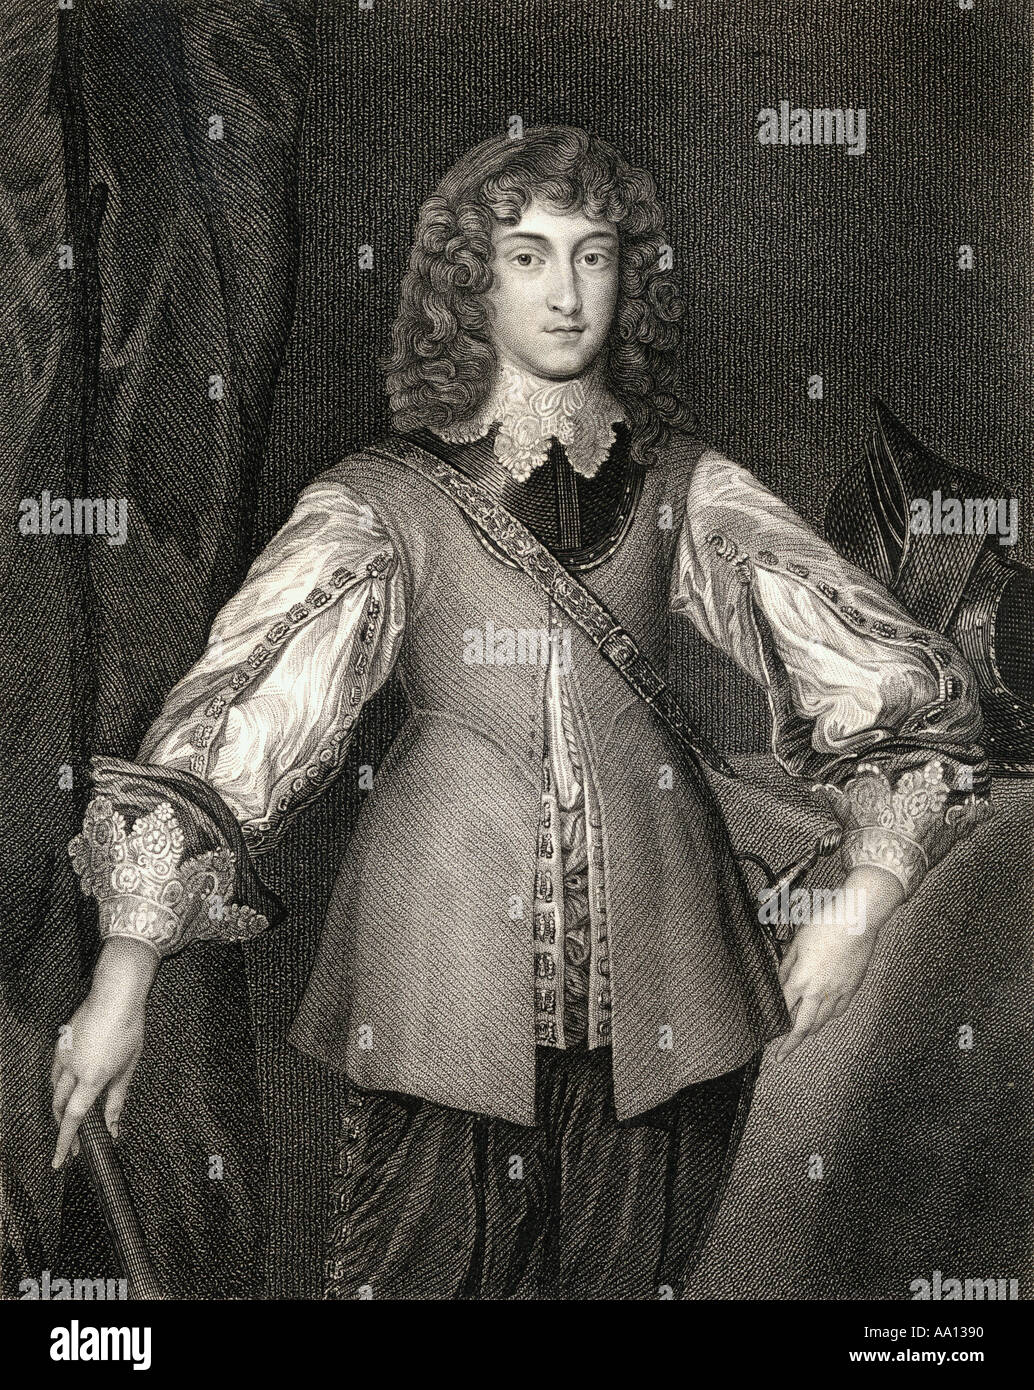 Prince Rupert of the Rhine, Duke of Cumberland, 1619 - 1682. German soldier, admiral, scientist, sportsman, colonial governor and amateur artist Stock Photo